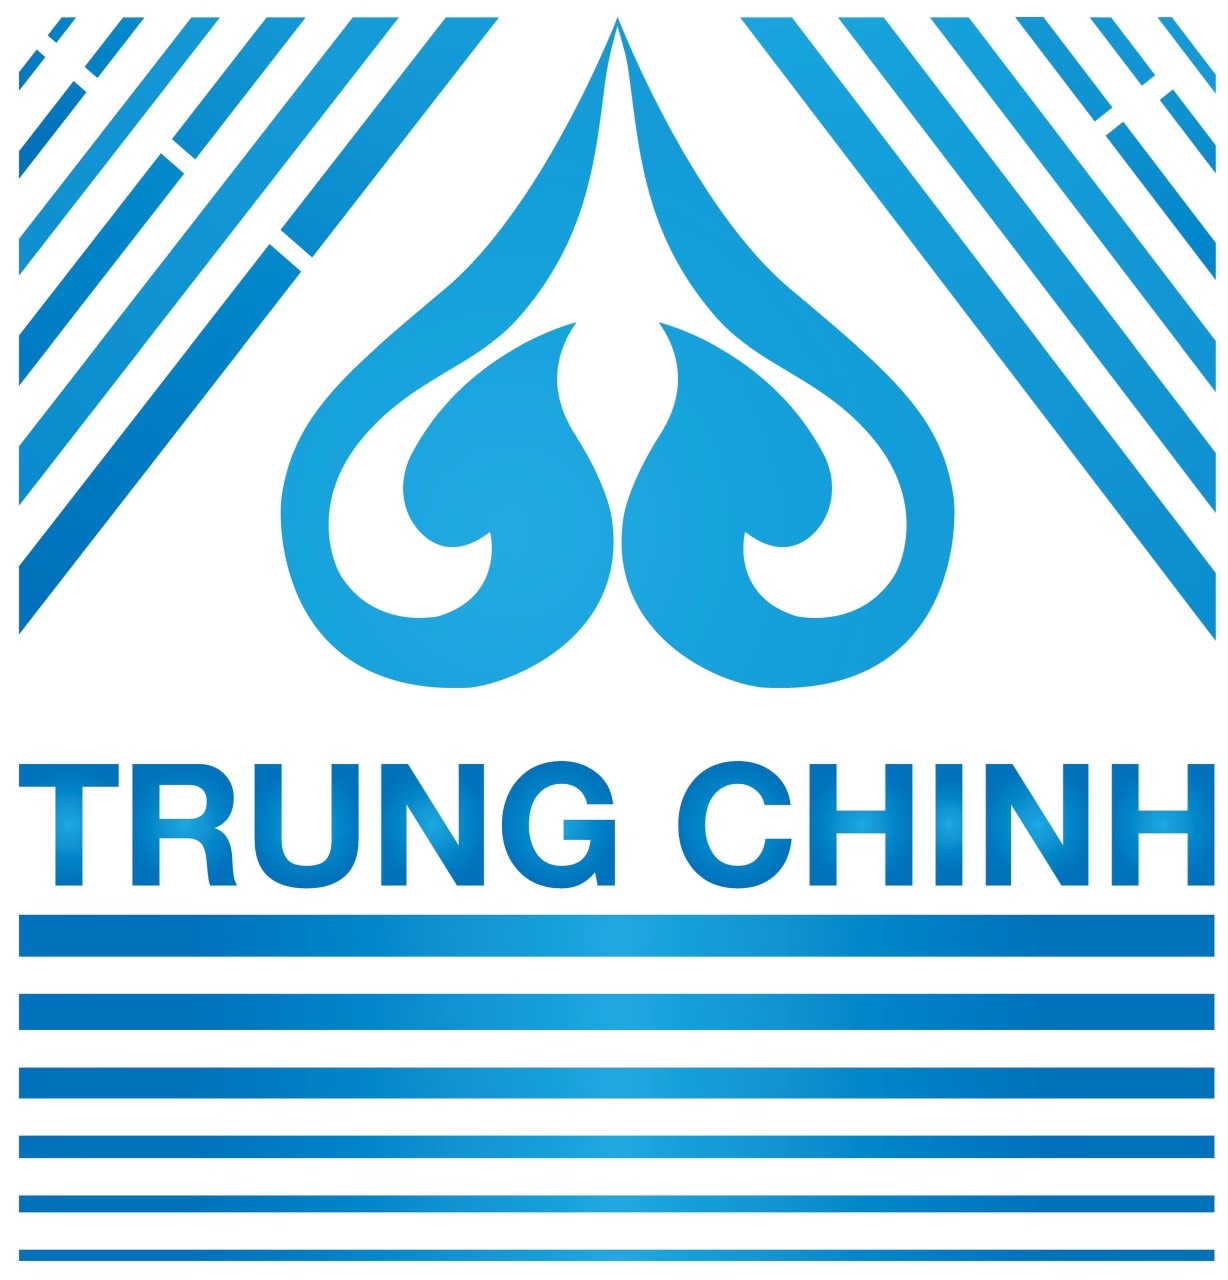 TRUNG CHINH